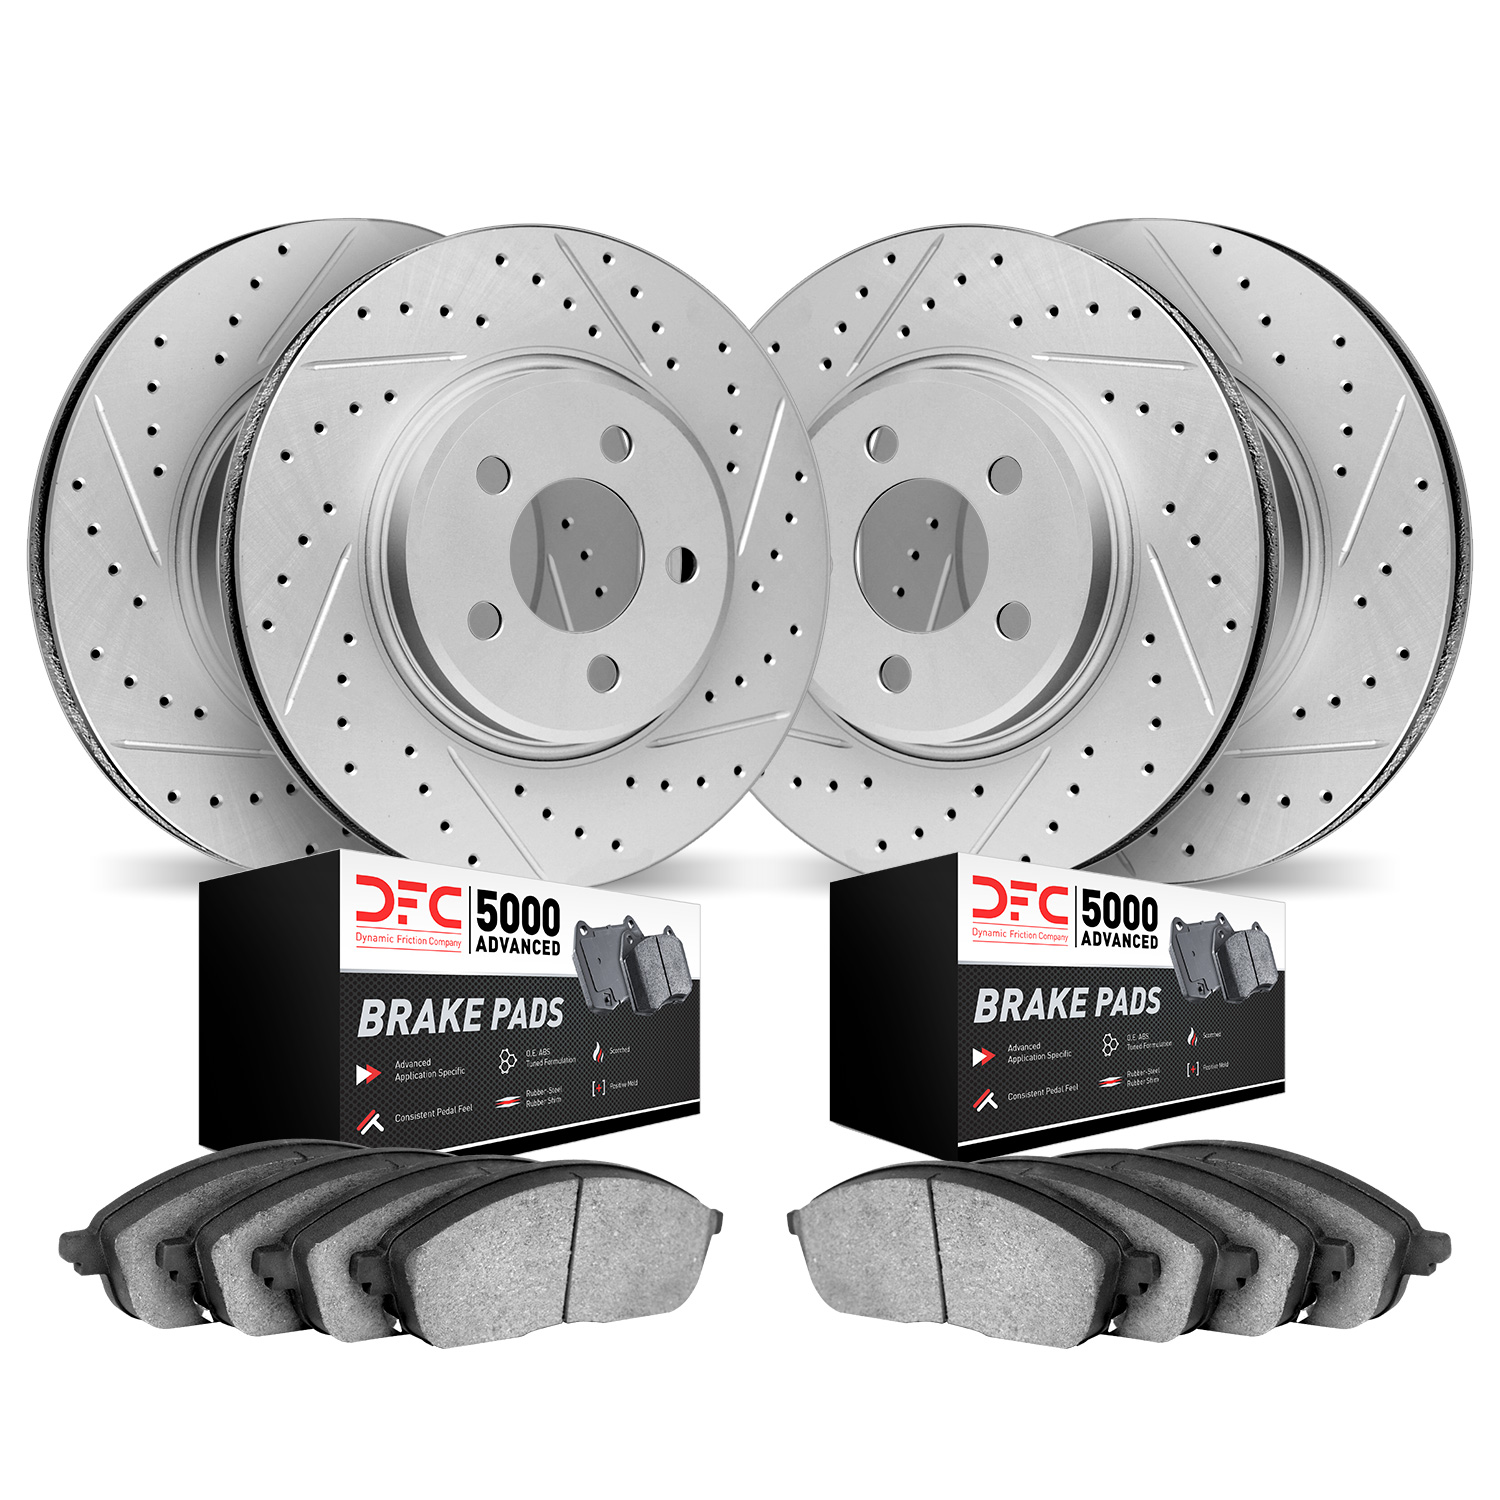 2504-46009 Geoperformance Drilled/Slotted Rotors w/5000 Advanced Brake Pads Kit, 1997-2009 GM, Position: Front and Rear